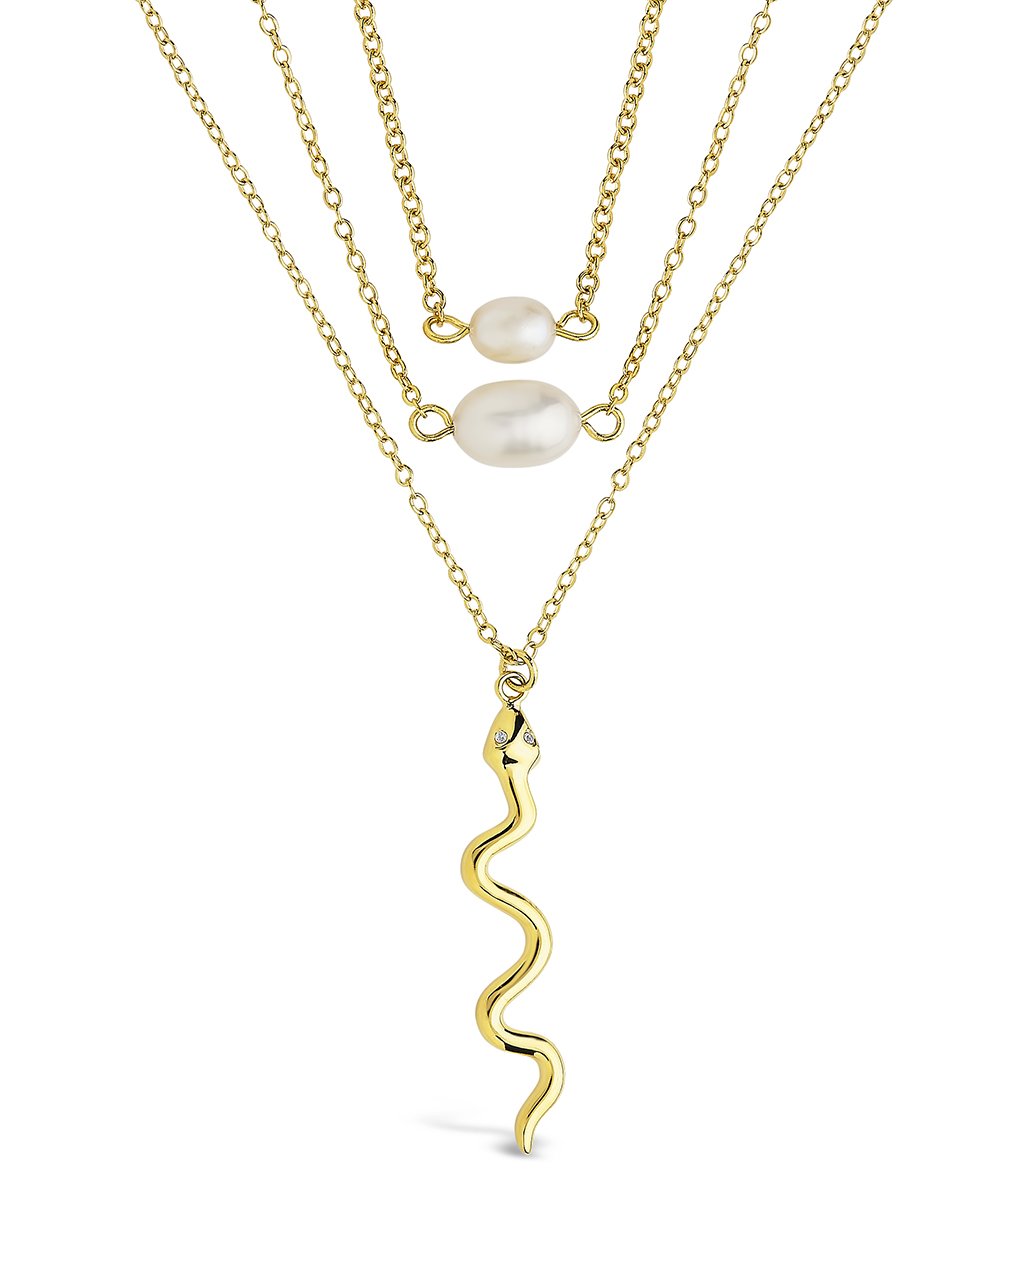 Wriggling Snake & Pearl Layered Necklace Necklace Sterling Forever Gold